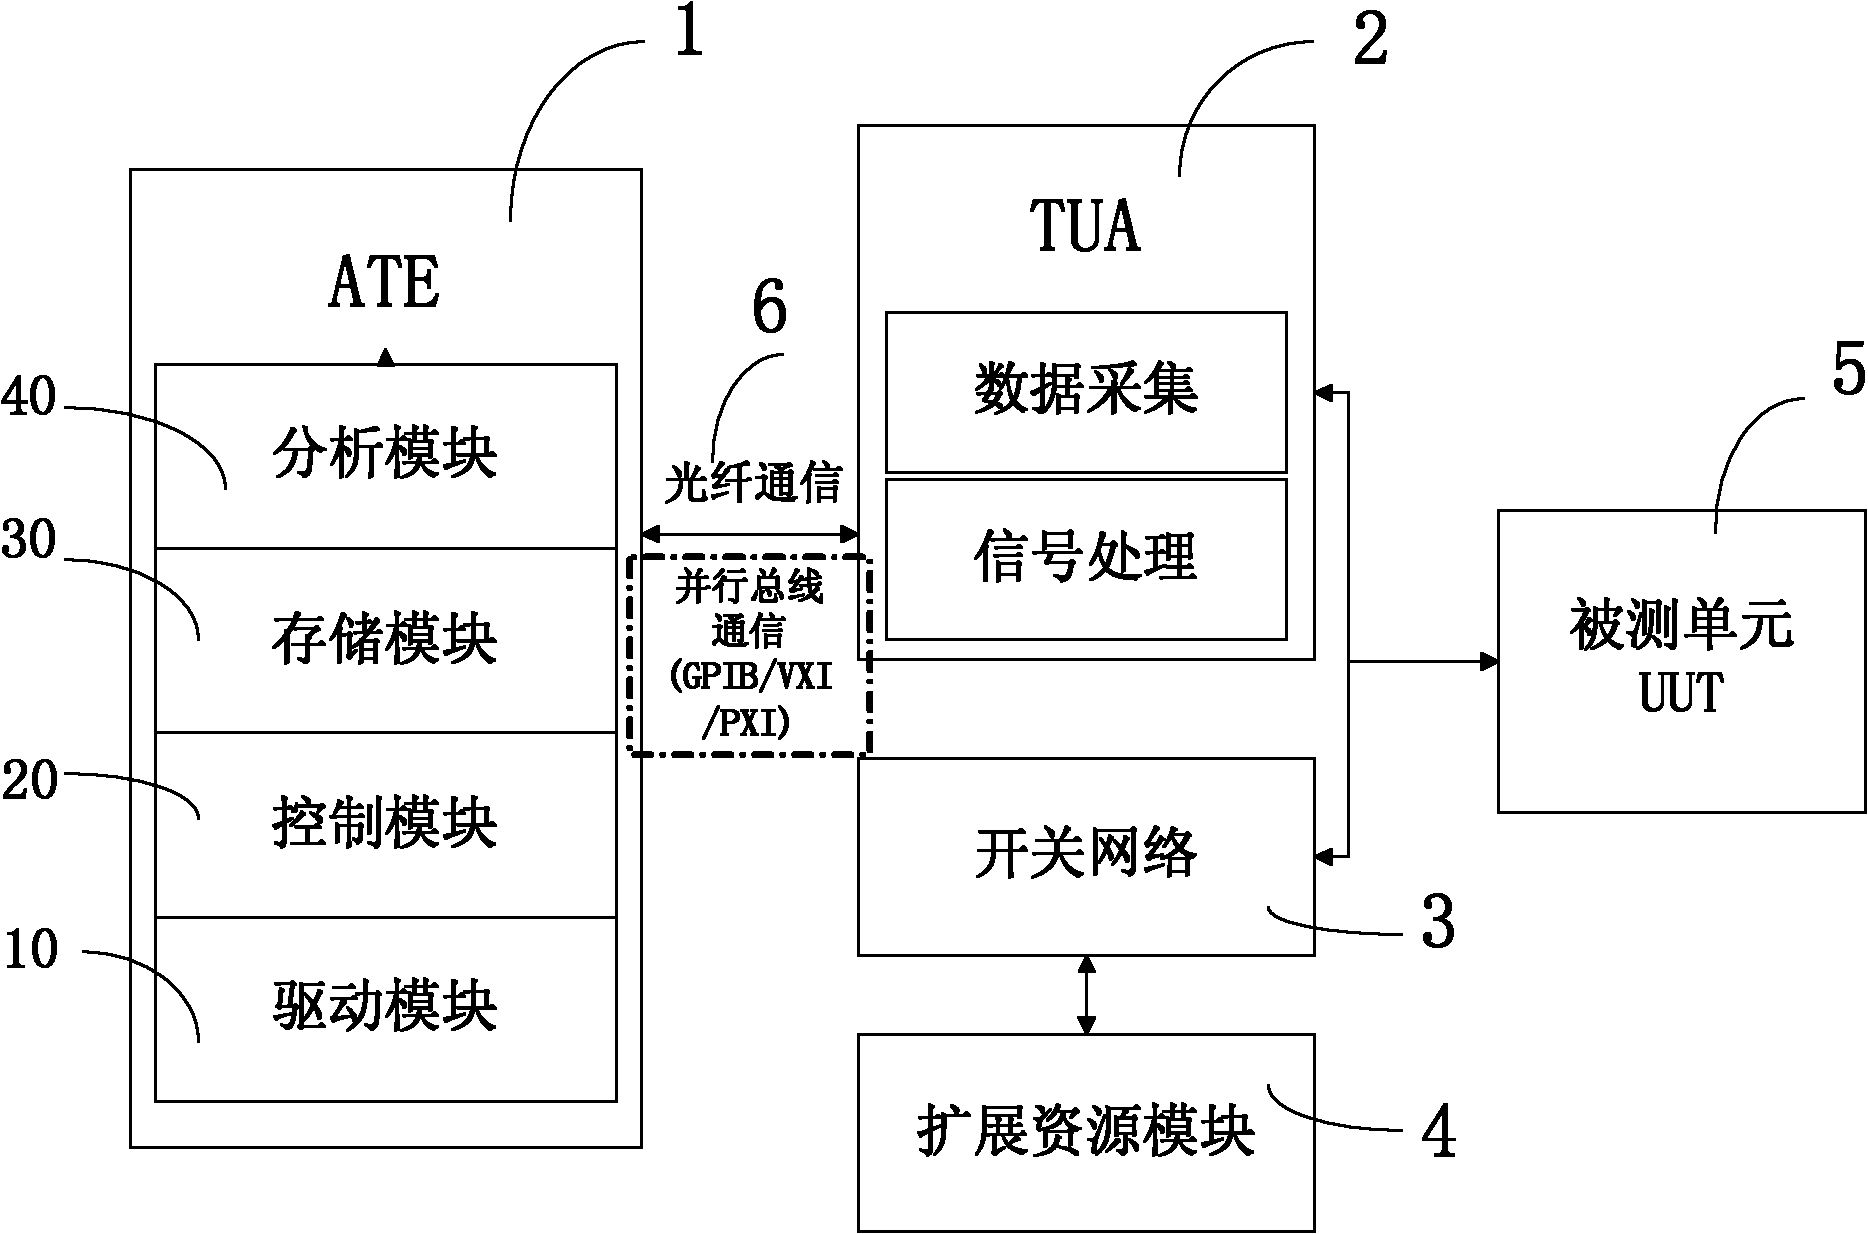 Fiber channel-based general automatic test system